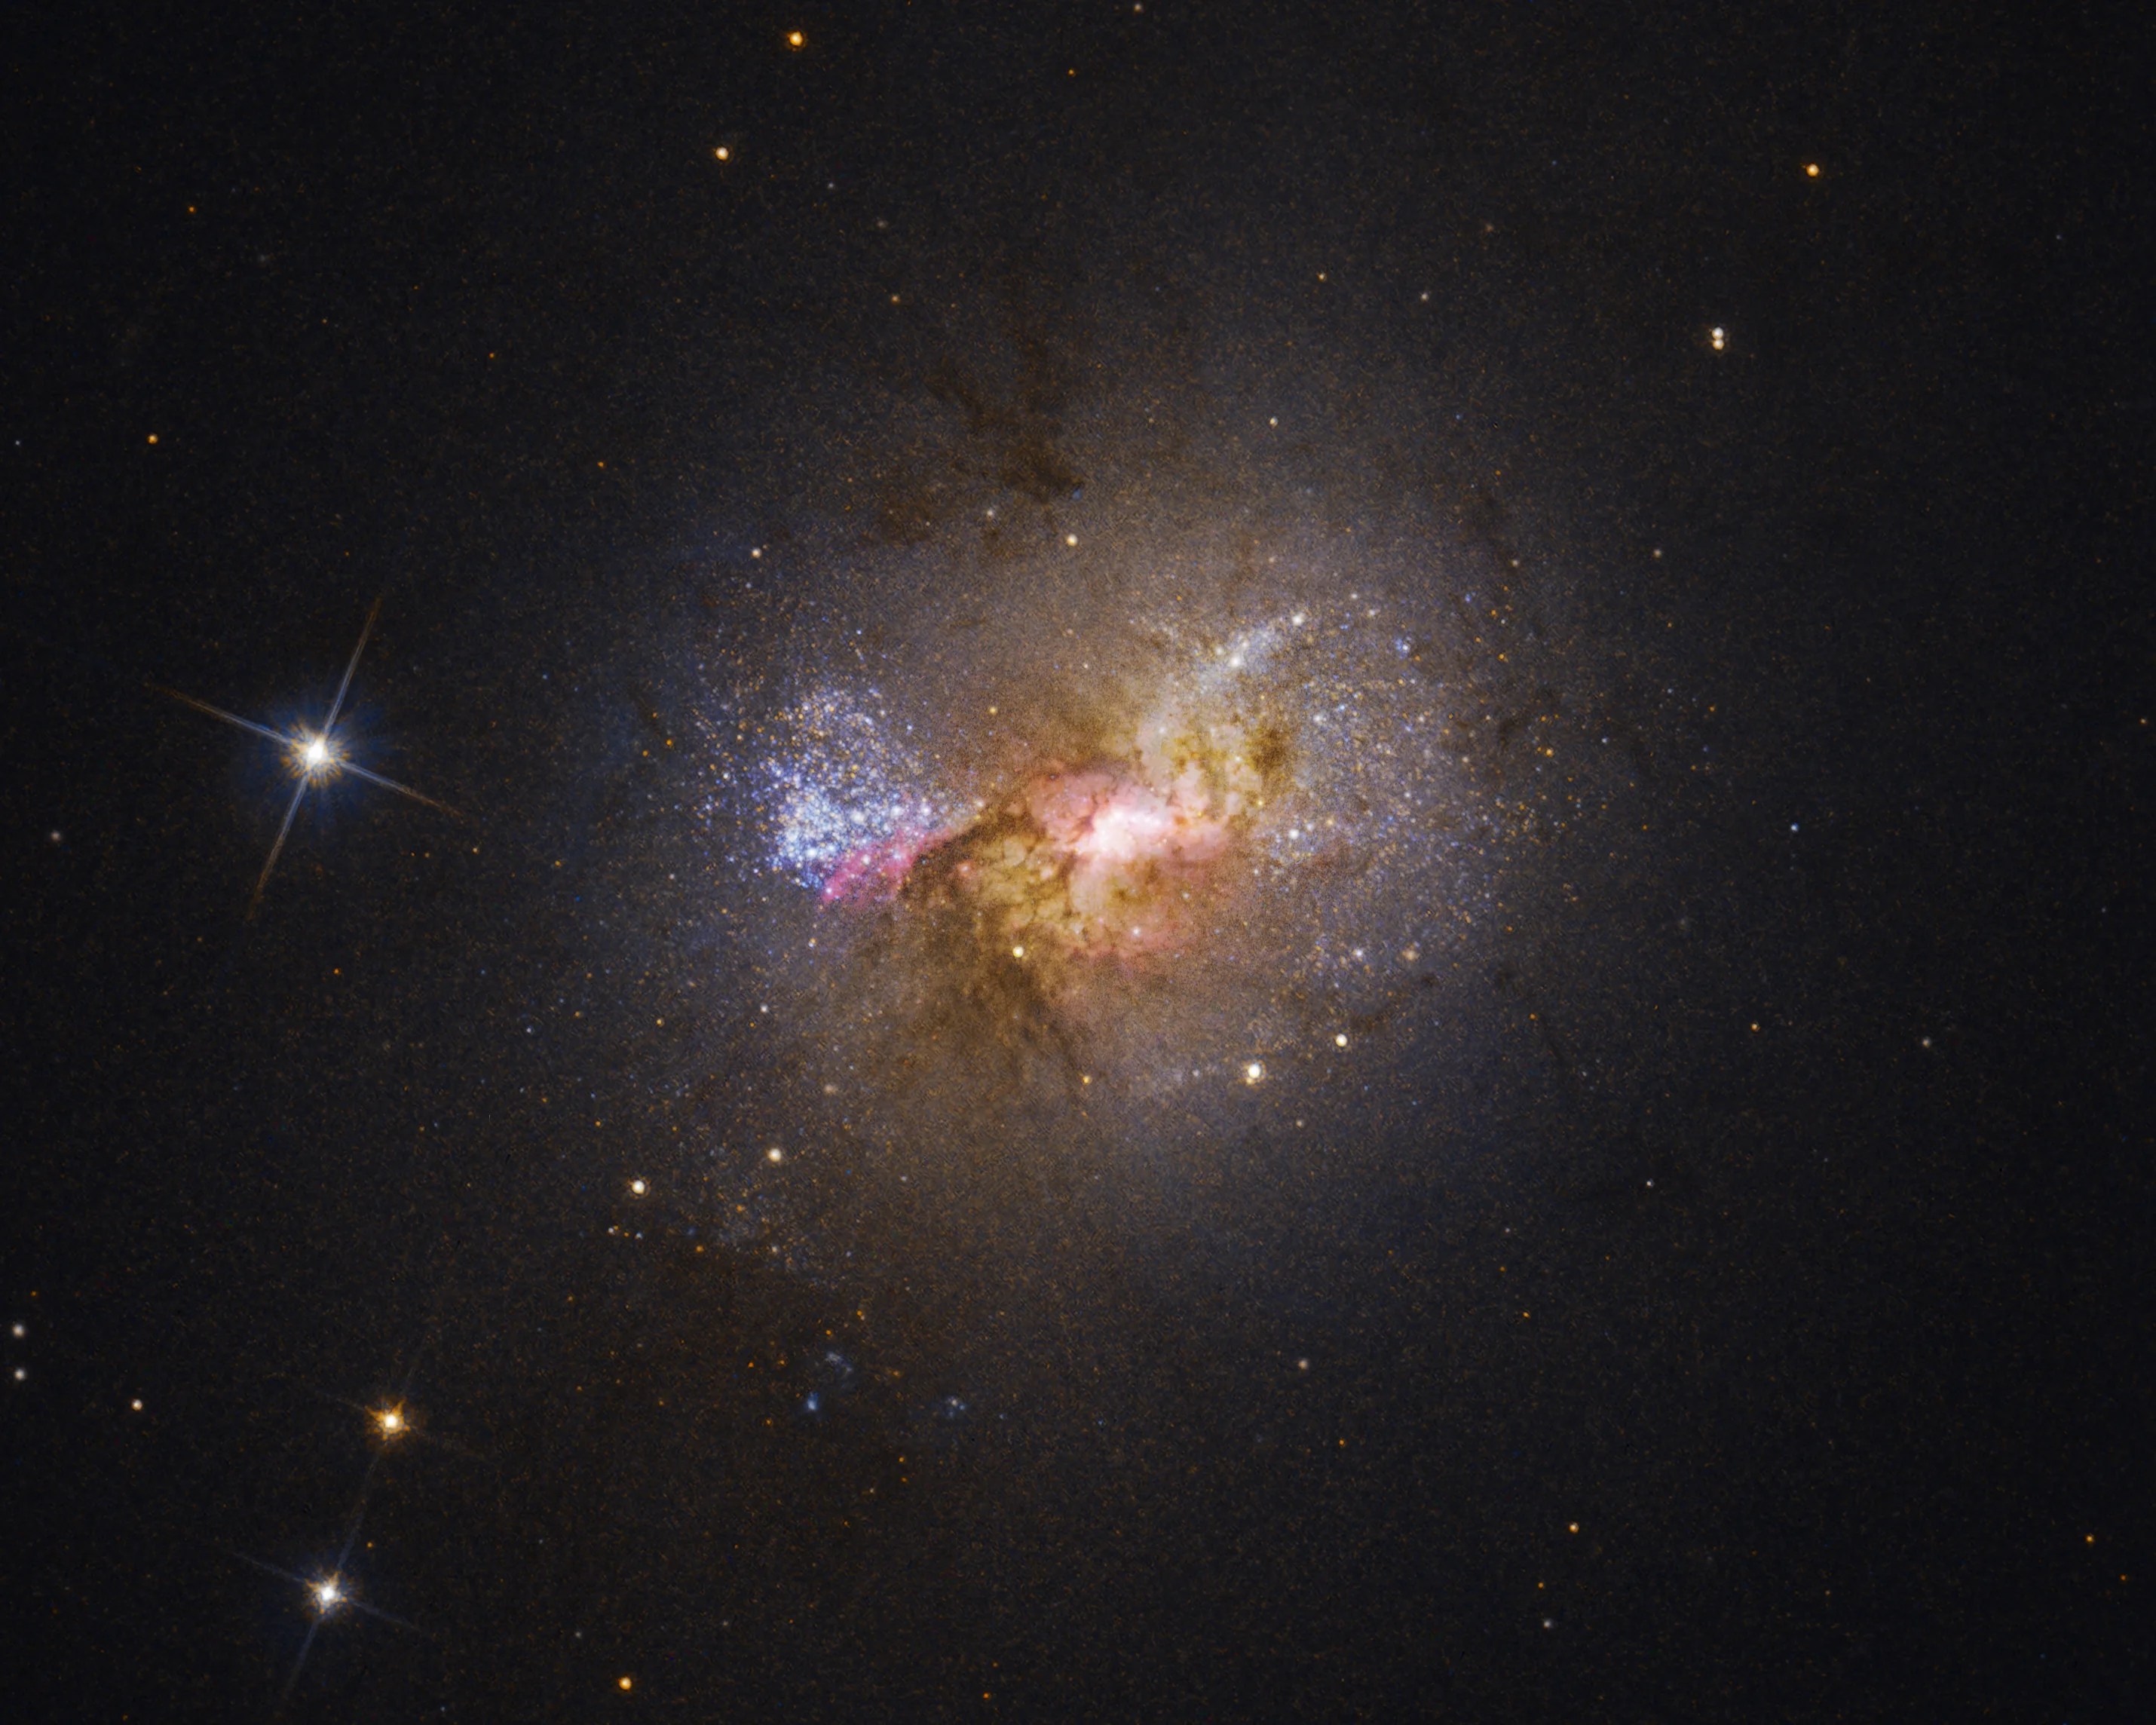 Dwarf galaxy with bright, blue stars, red and amber gas clouds, no visible spiral arms